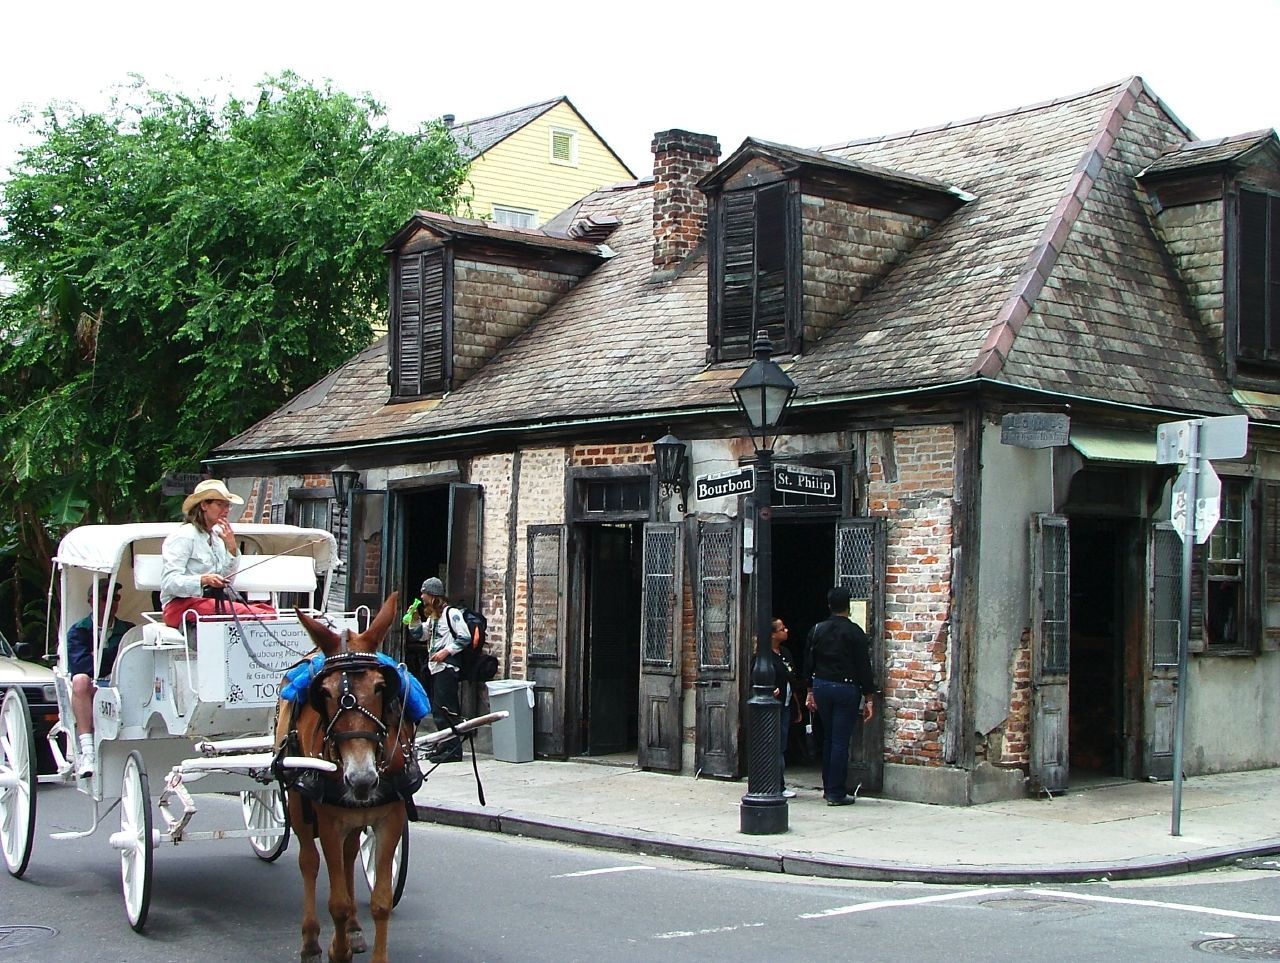 Lafitte's Blacksmith Shop is reportedly the oldest bar building in the U.S.